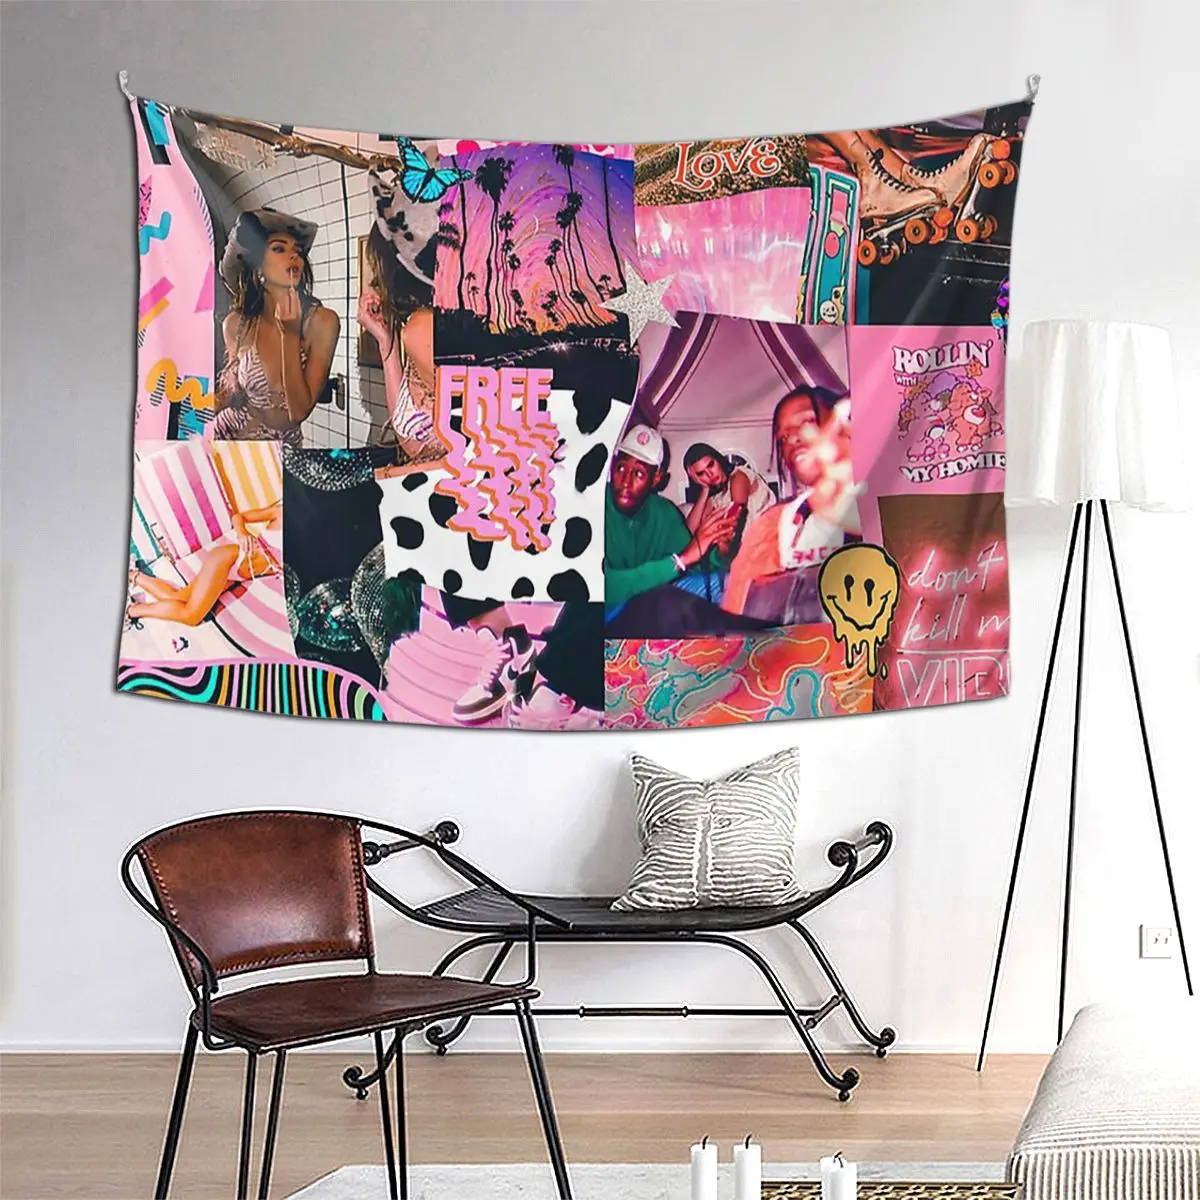 

Trippy Baby Collage Tapestry Funny Wall Hanging Aesthetic Home Decor Tapestries for Living Room Bedroom Dorm Room